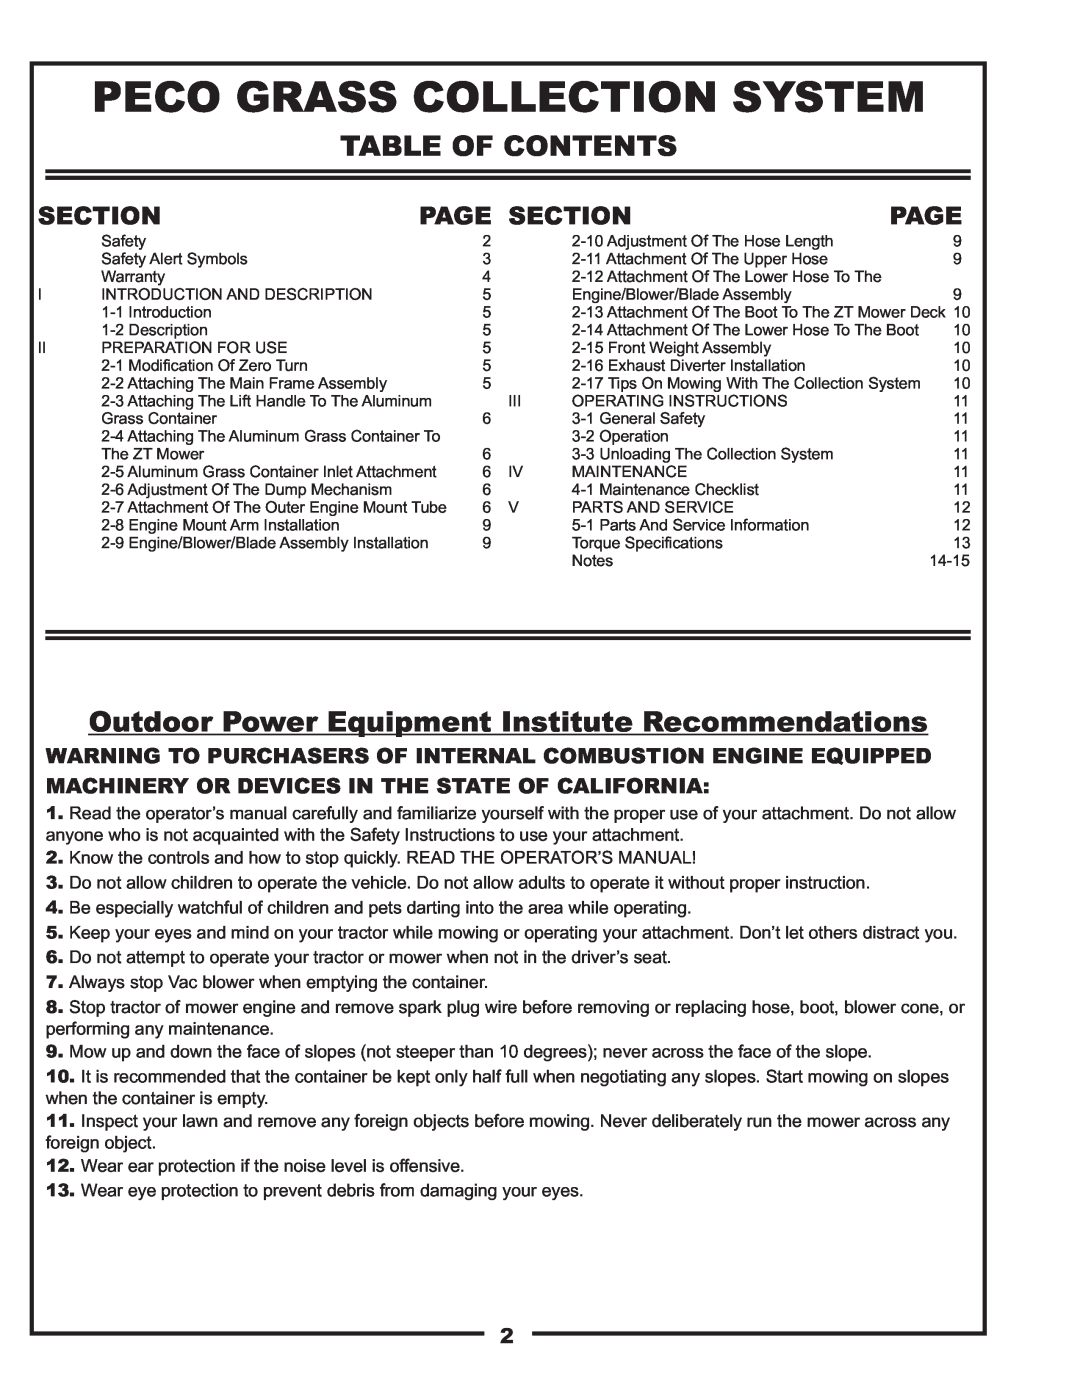 Toro 22621223-24 Table Of Contents, Outdoor Power Equipment Institute Recommendations, Peco Grass Collection System, Page 